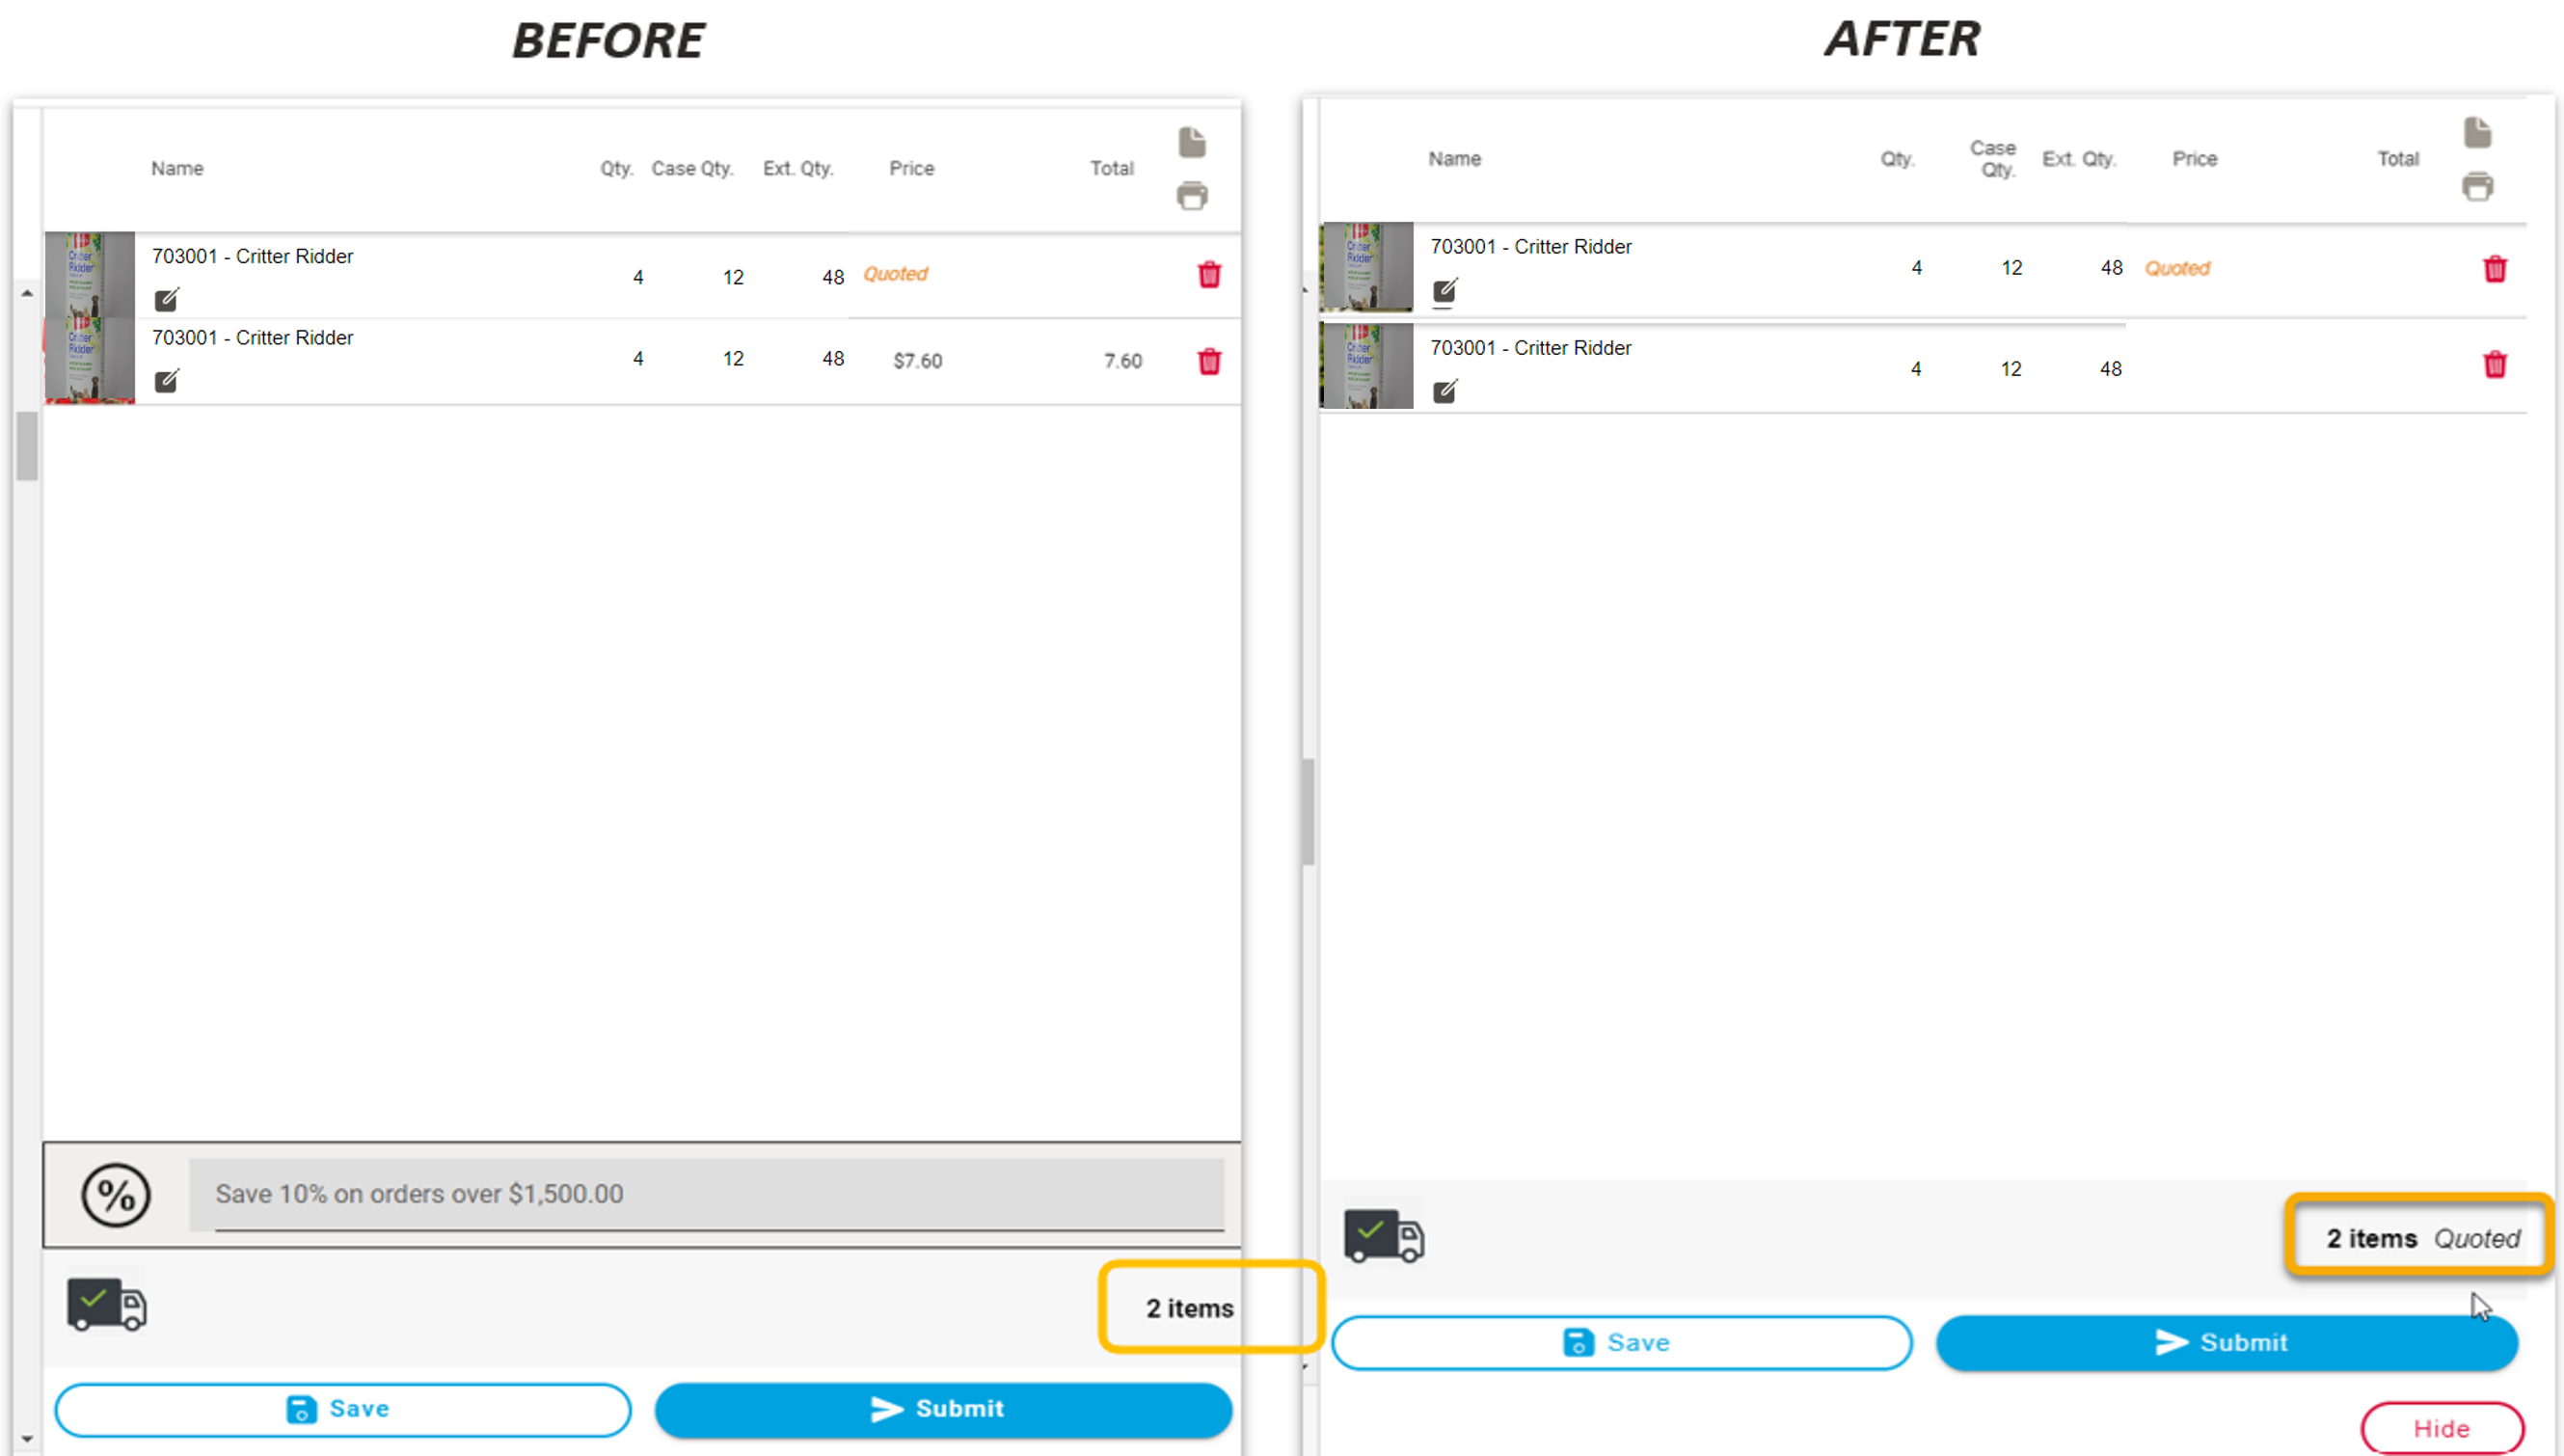 Customers can see quantity of quoted items, comparing before and after